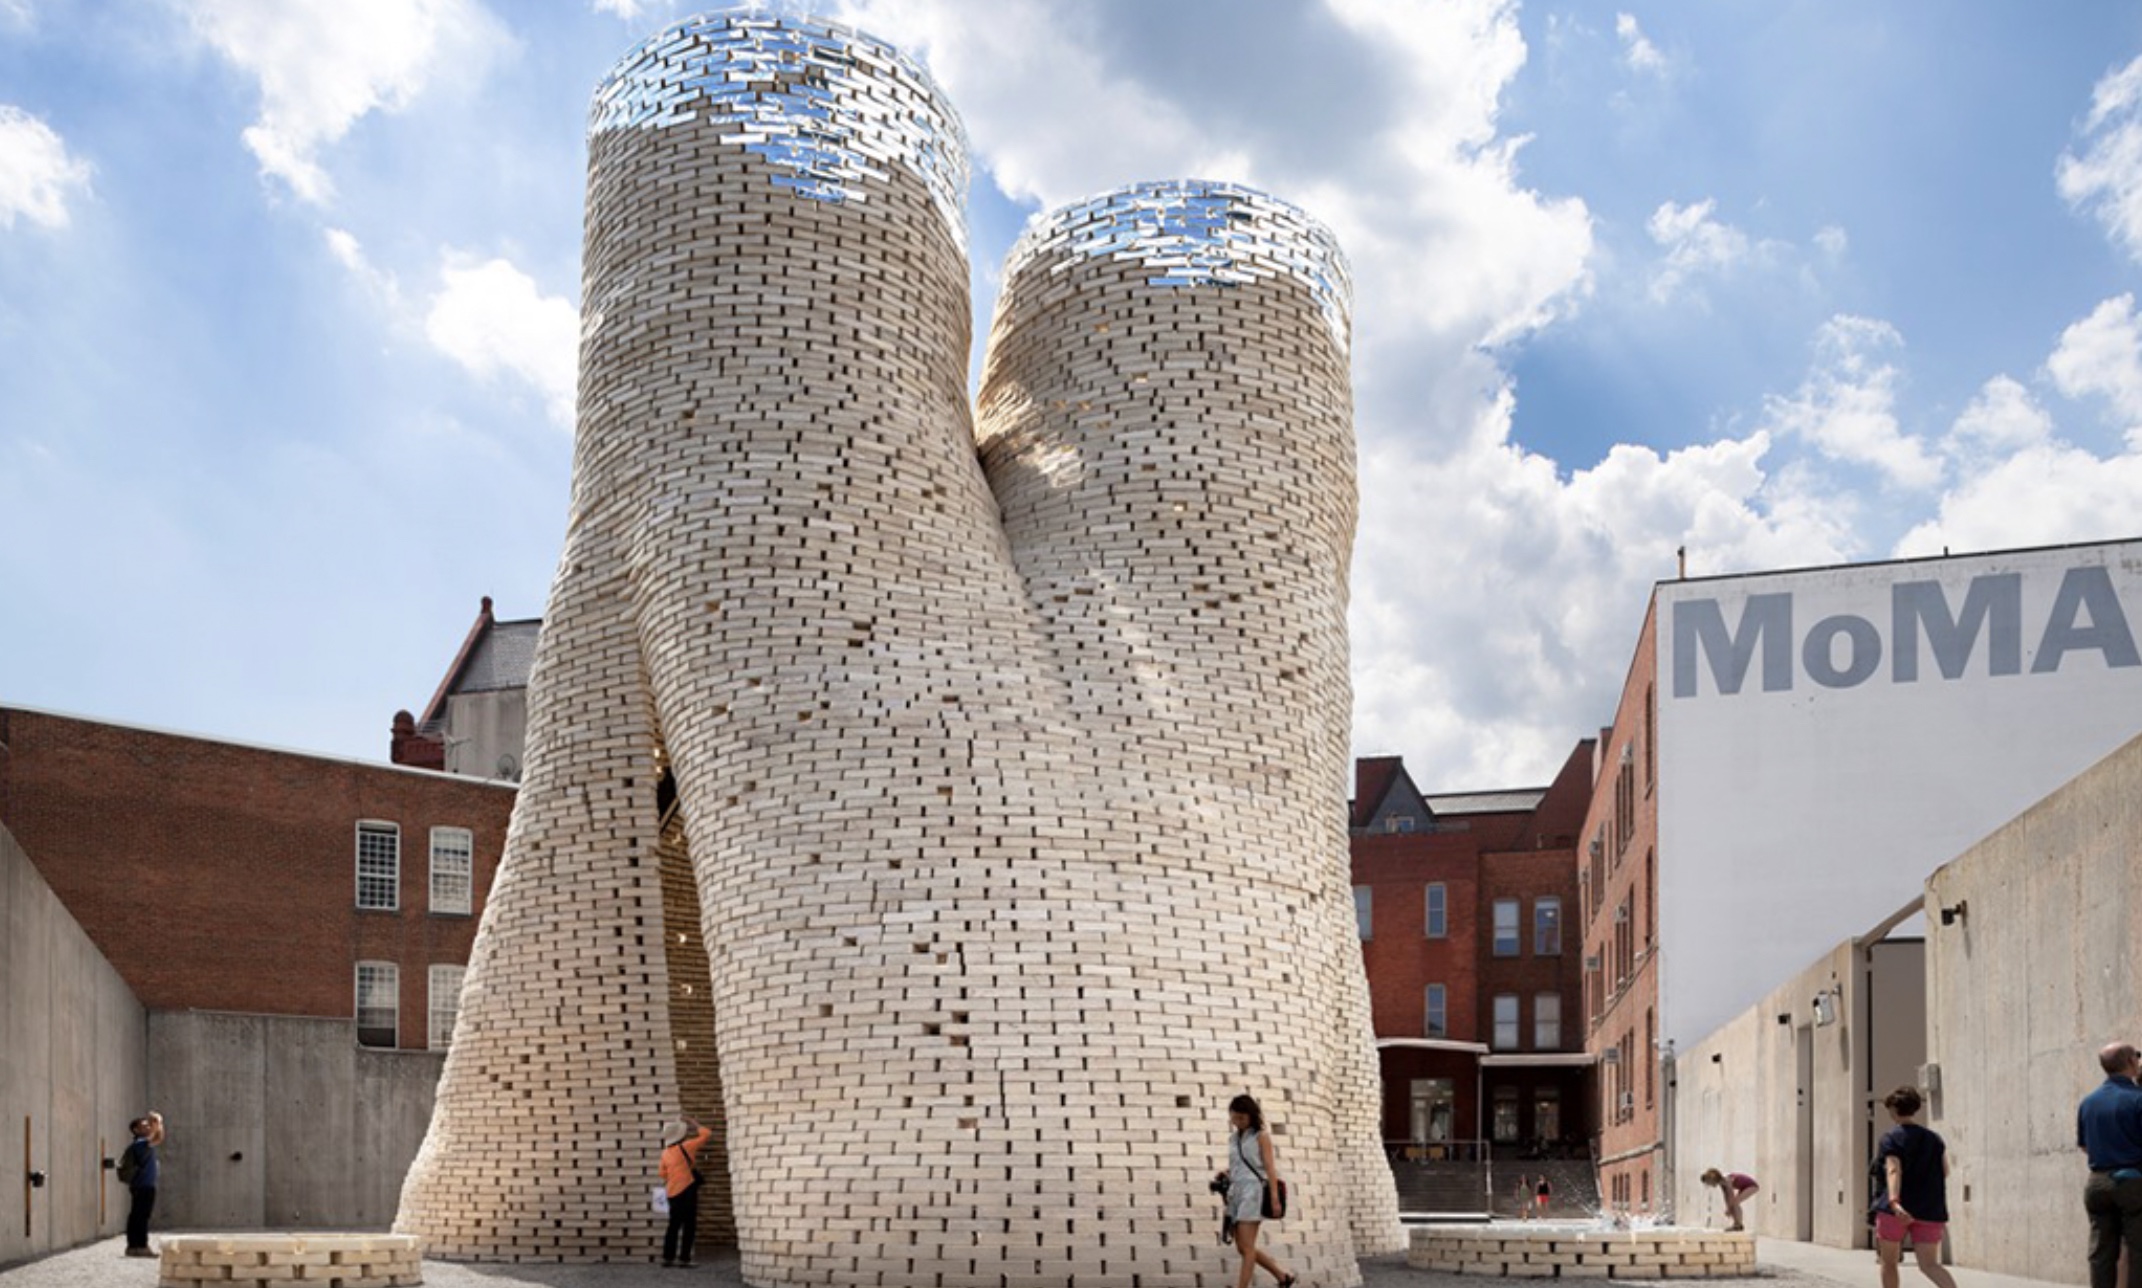 Using Fungi as a Building Material